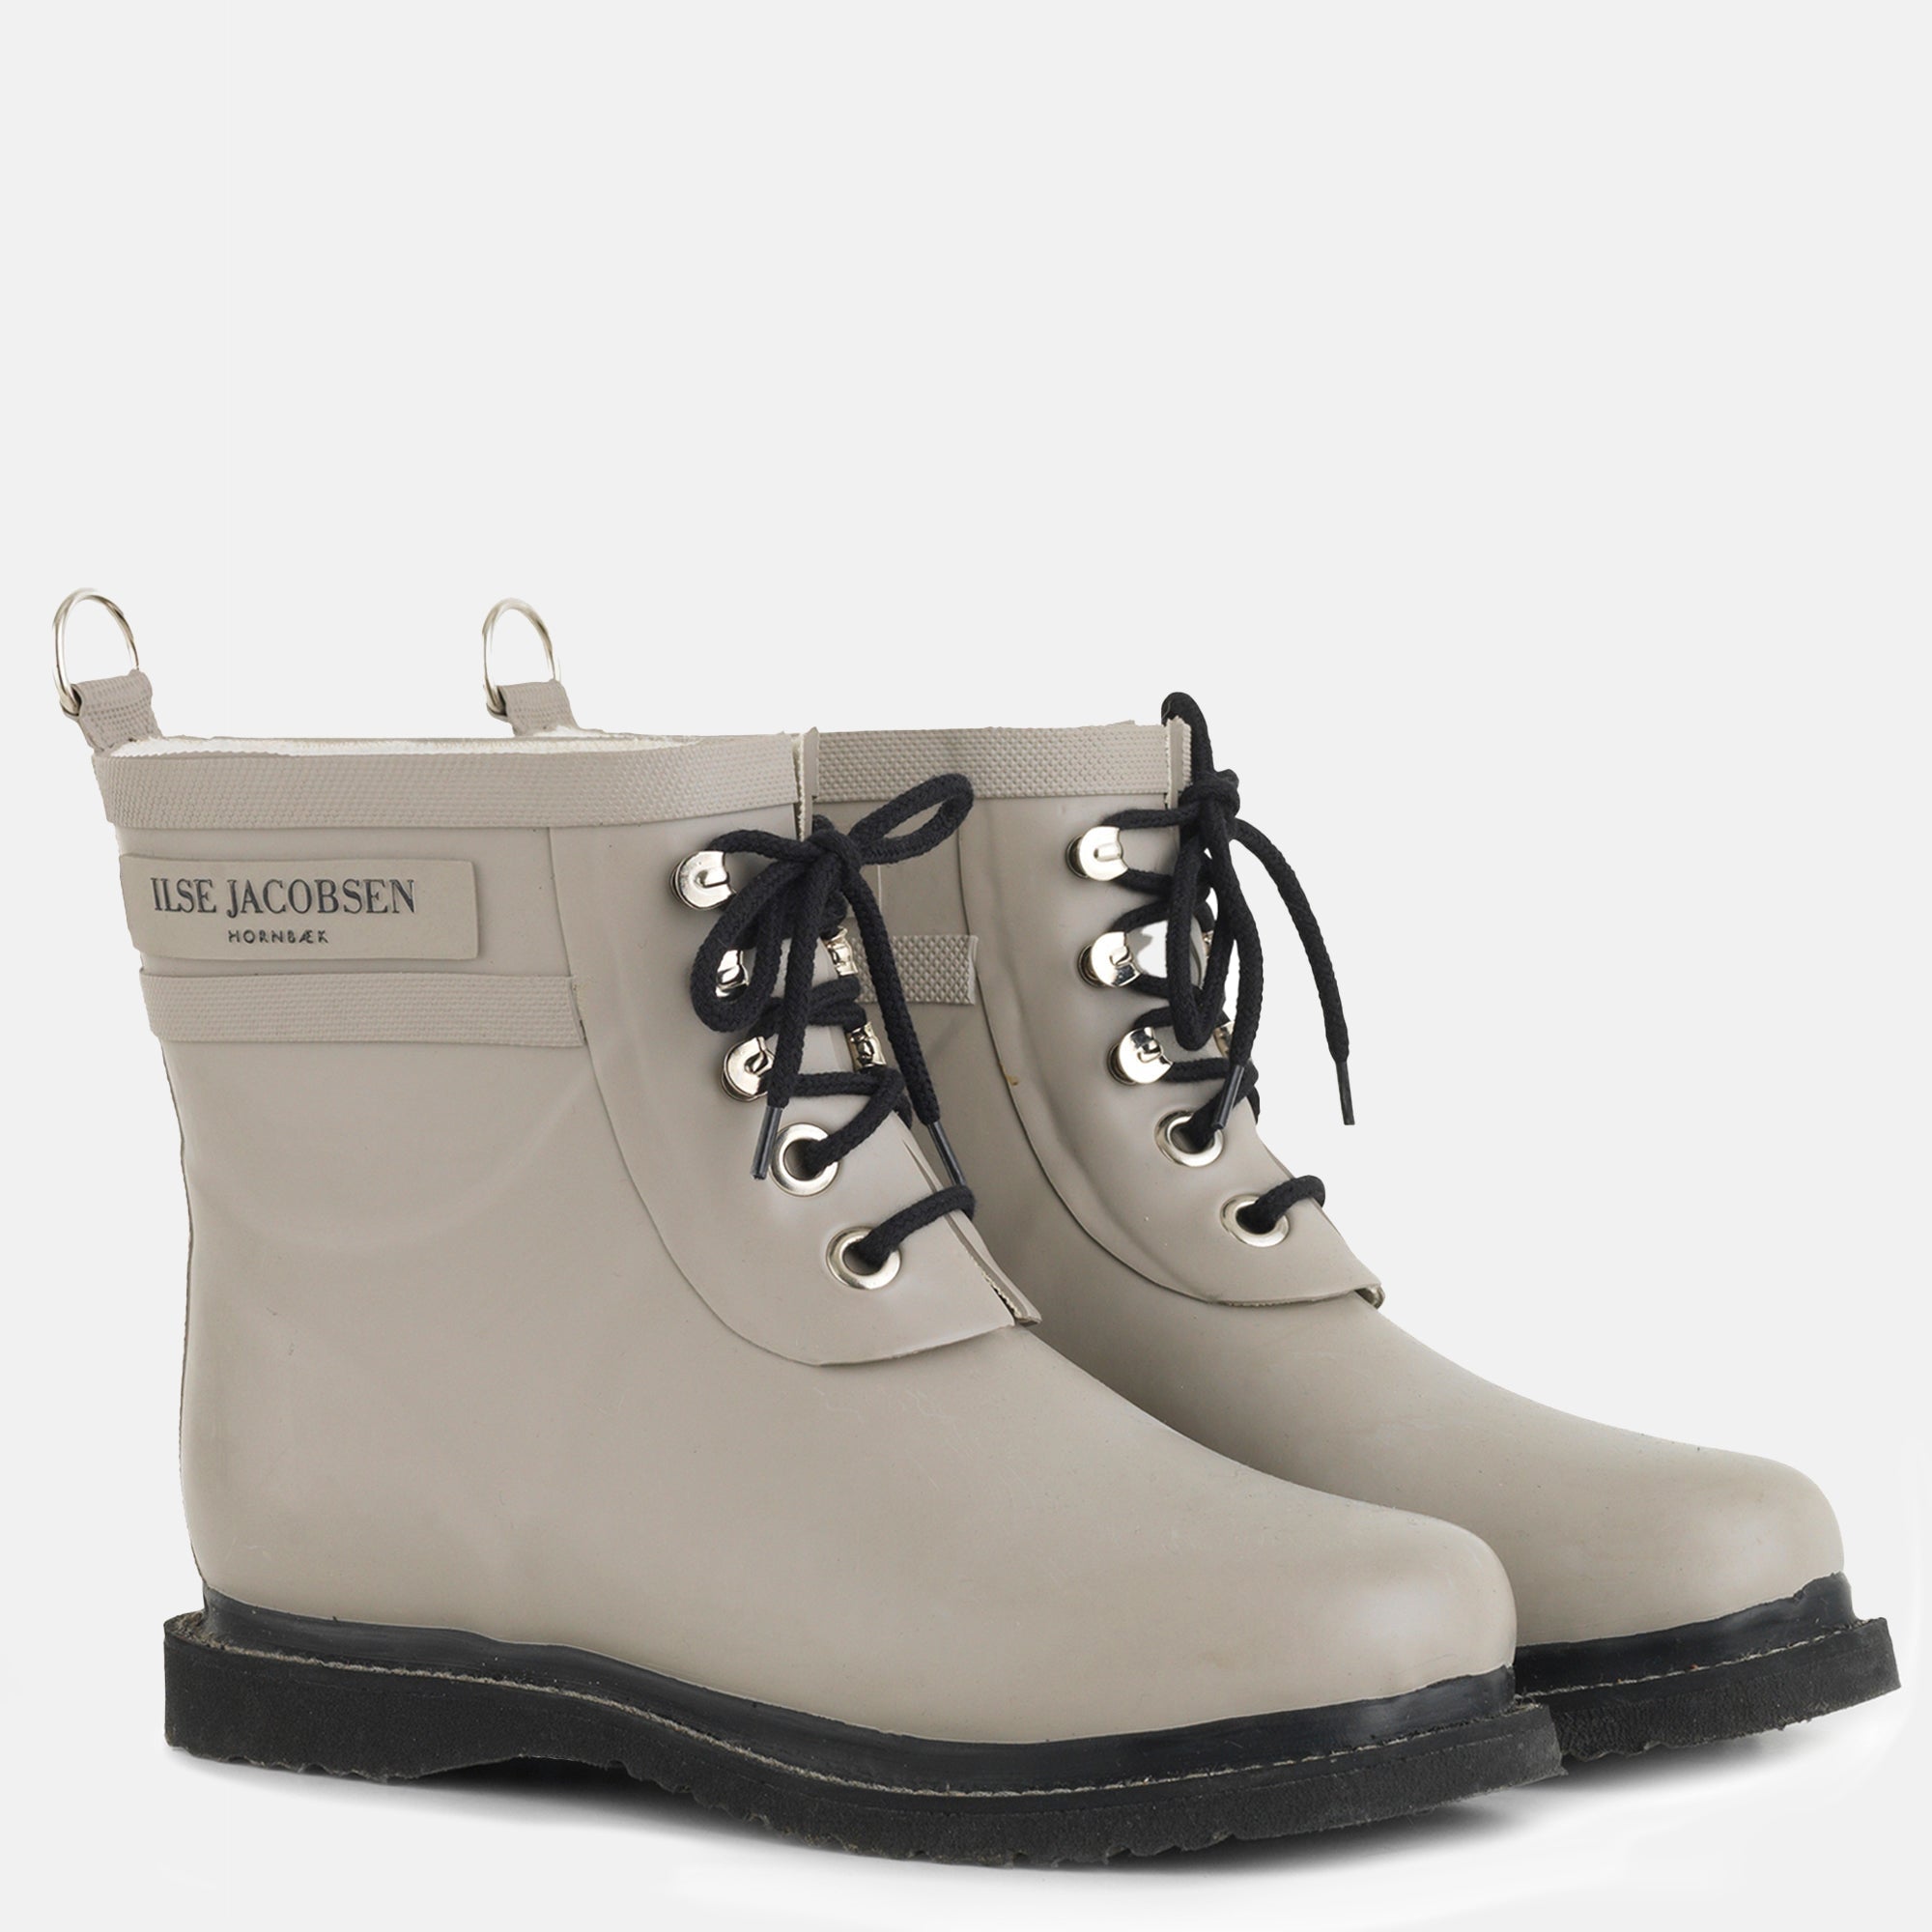 Short Rubber Boots RUB2 - 149 Atmosphere | Atmosphere